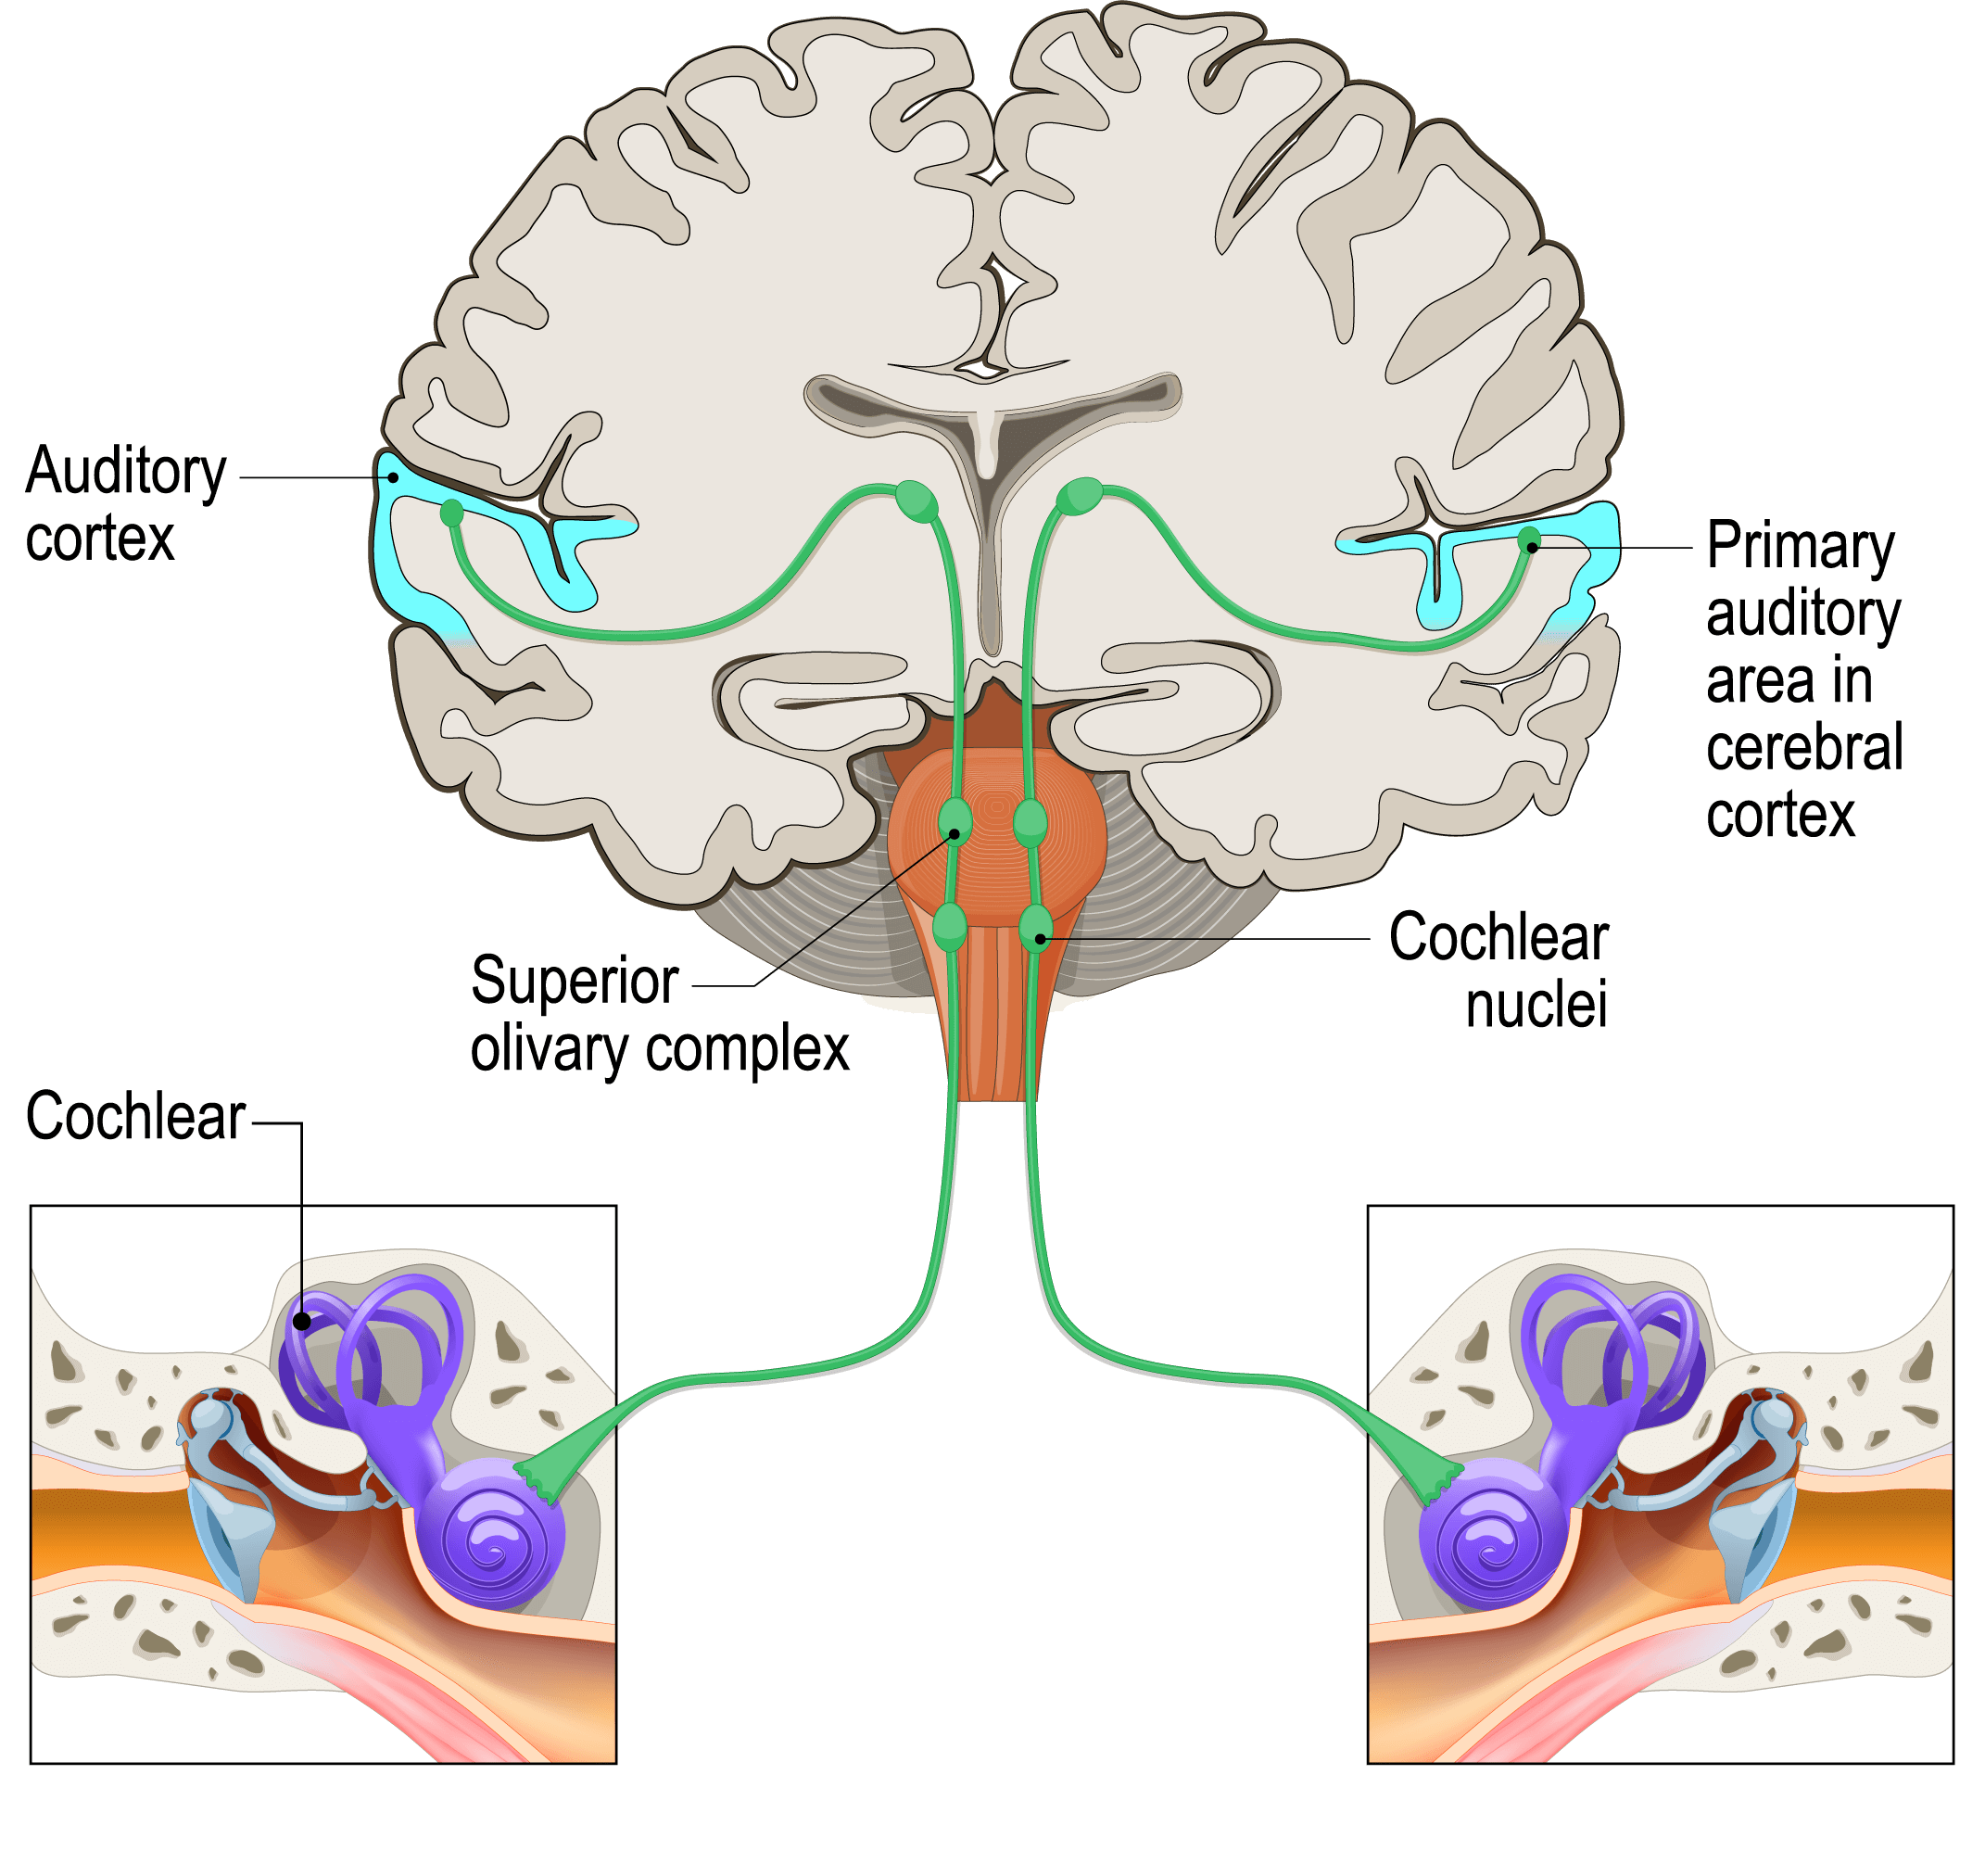 The Auditory Brain